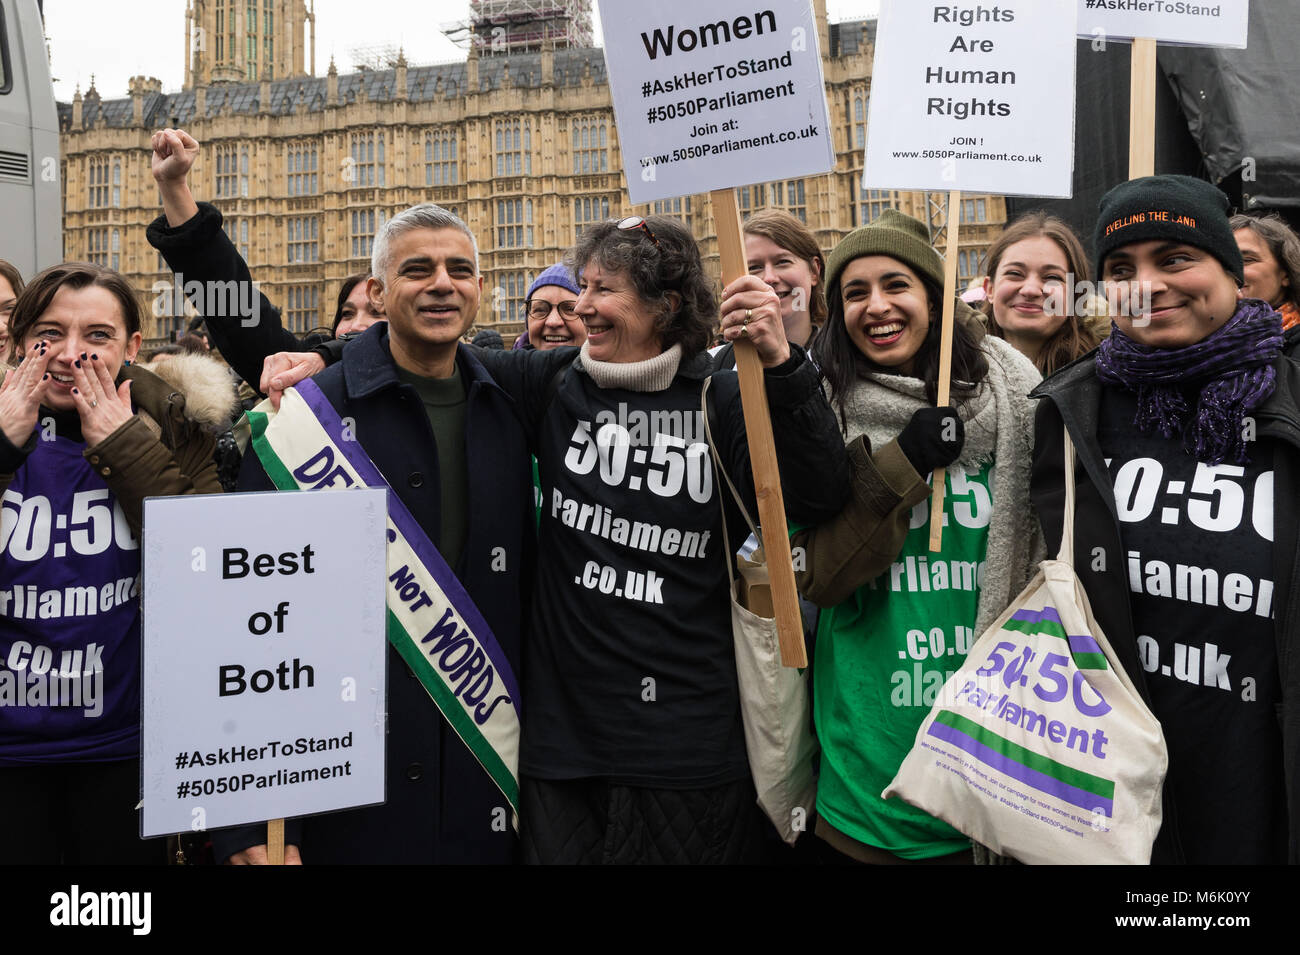 London, UK. 4th March, 2018. Mayor of London Sadiq Khan (2L) with activists at Old Palace Yard outside the Houses of Parliament in London ahead of March4Women, an annual event to celebrate International Women's Day and 100 years since women in the UK first gained the right to vote. The event, organised by CARE International, aims to highlight inequality faced by women and girls around the world and campaign for gender equality and women's rights worldwide. Credit: Wiktor Szymanowicz/Alamy Live News Stock Photo